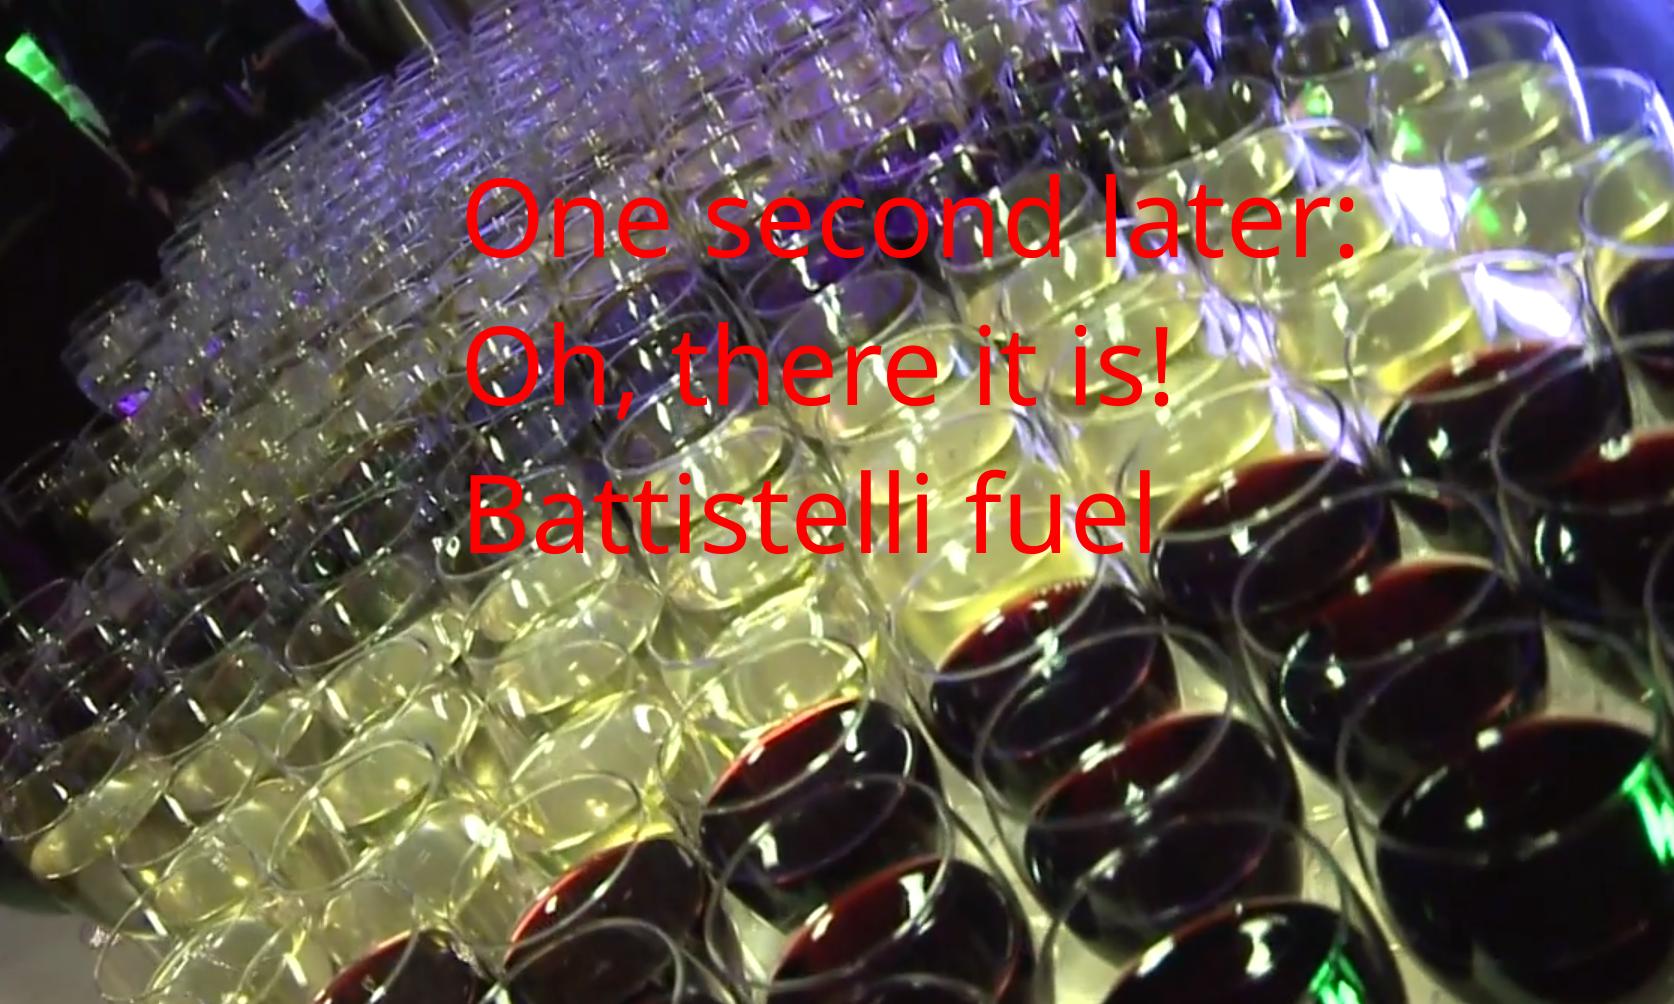 One second later: Oh, there it is! Battistelli fuel